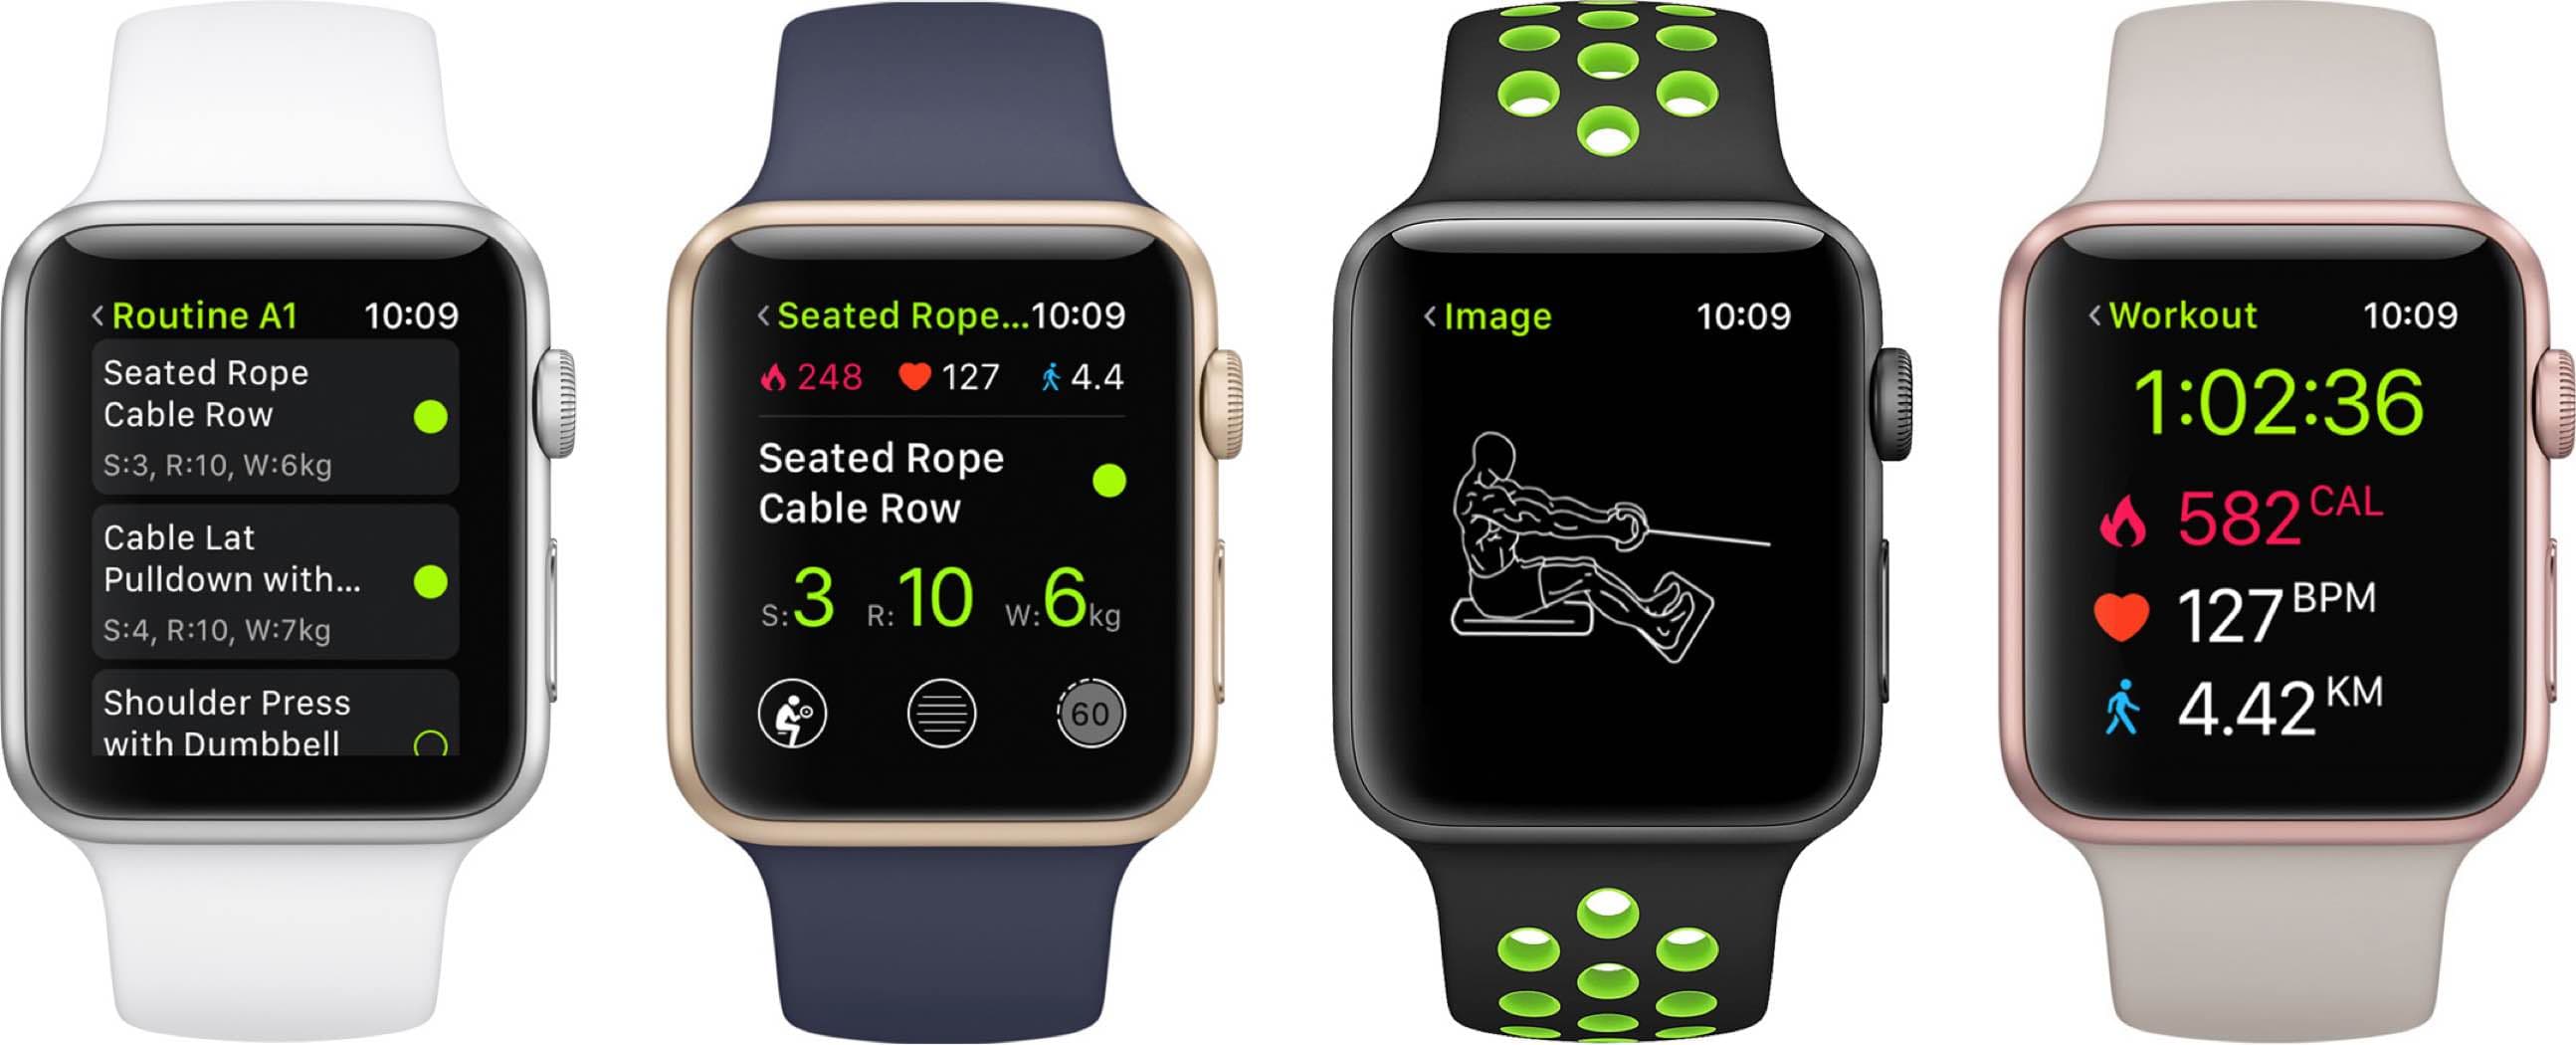 SmartGym iOS and Apple Watch app unveils redesigned routines, enhanced widget and new shortcuts